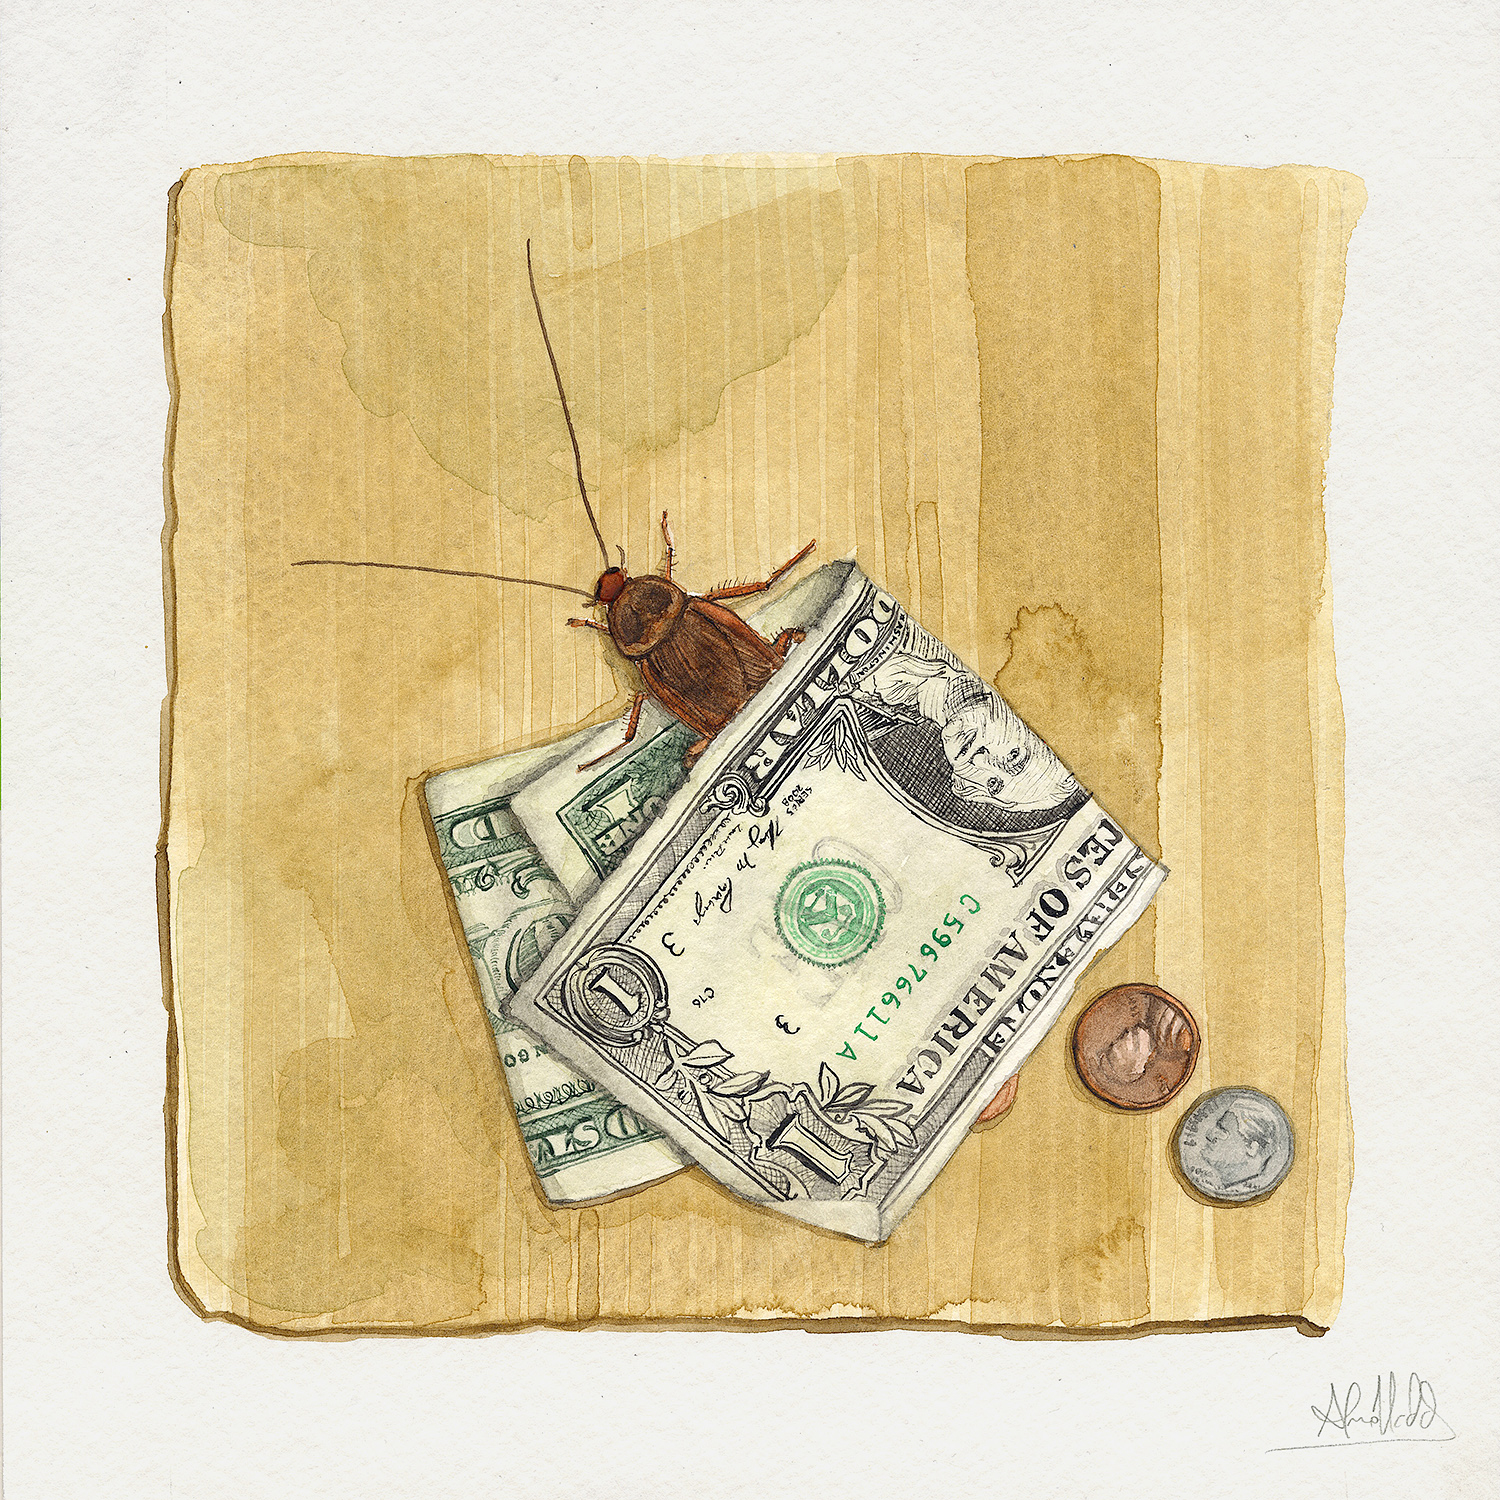 Alvaro Naddeo, Two Dollars and Two Cents, 2015. Watercolor on paper, 9 x 9 in.